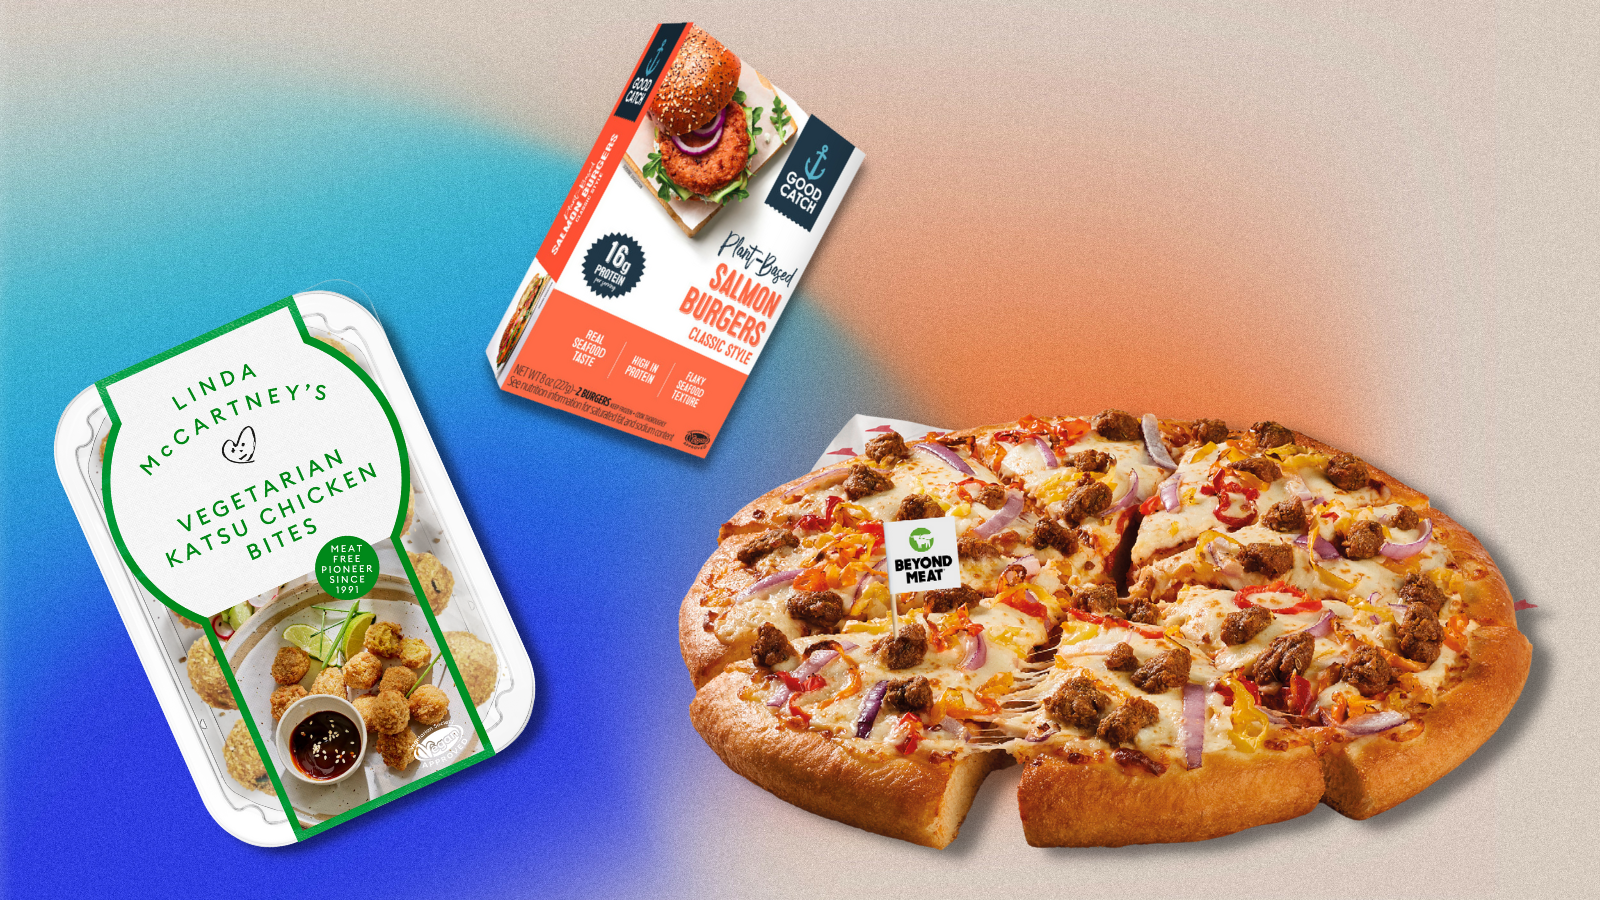 Top veganuary food launches from Beyond Meat, Linda McCartney, Good Catch and more